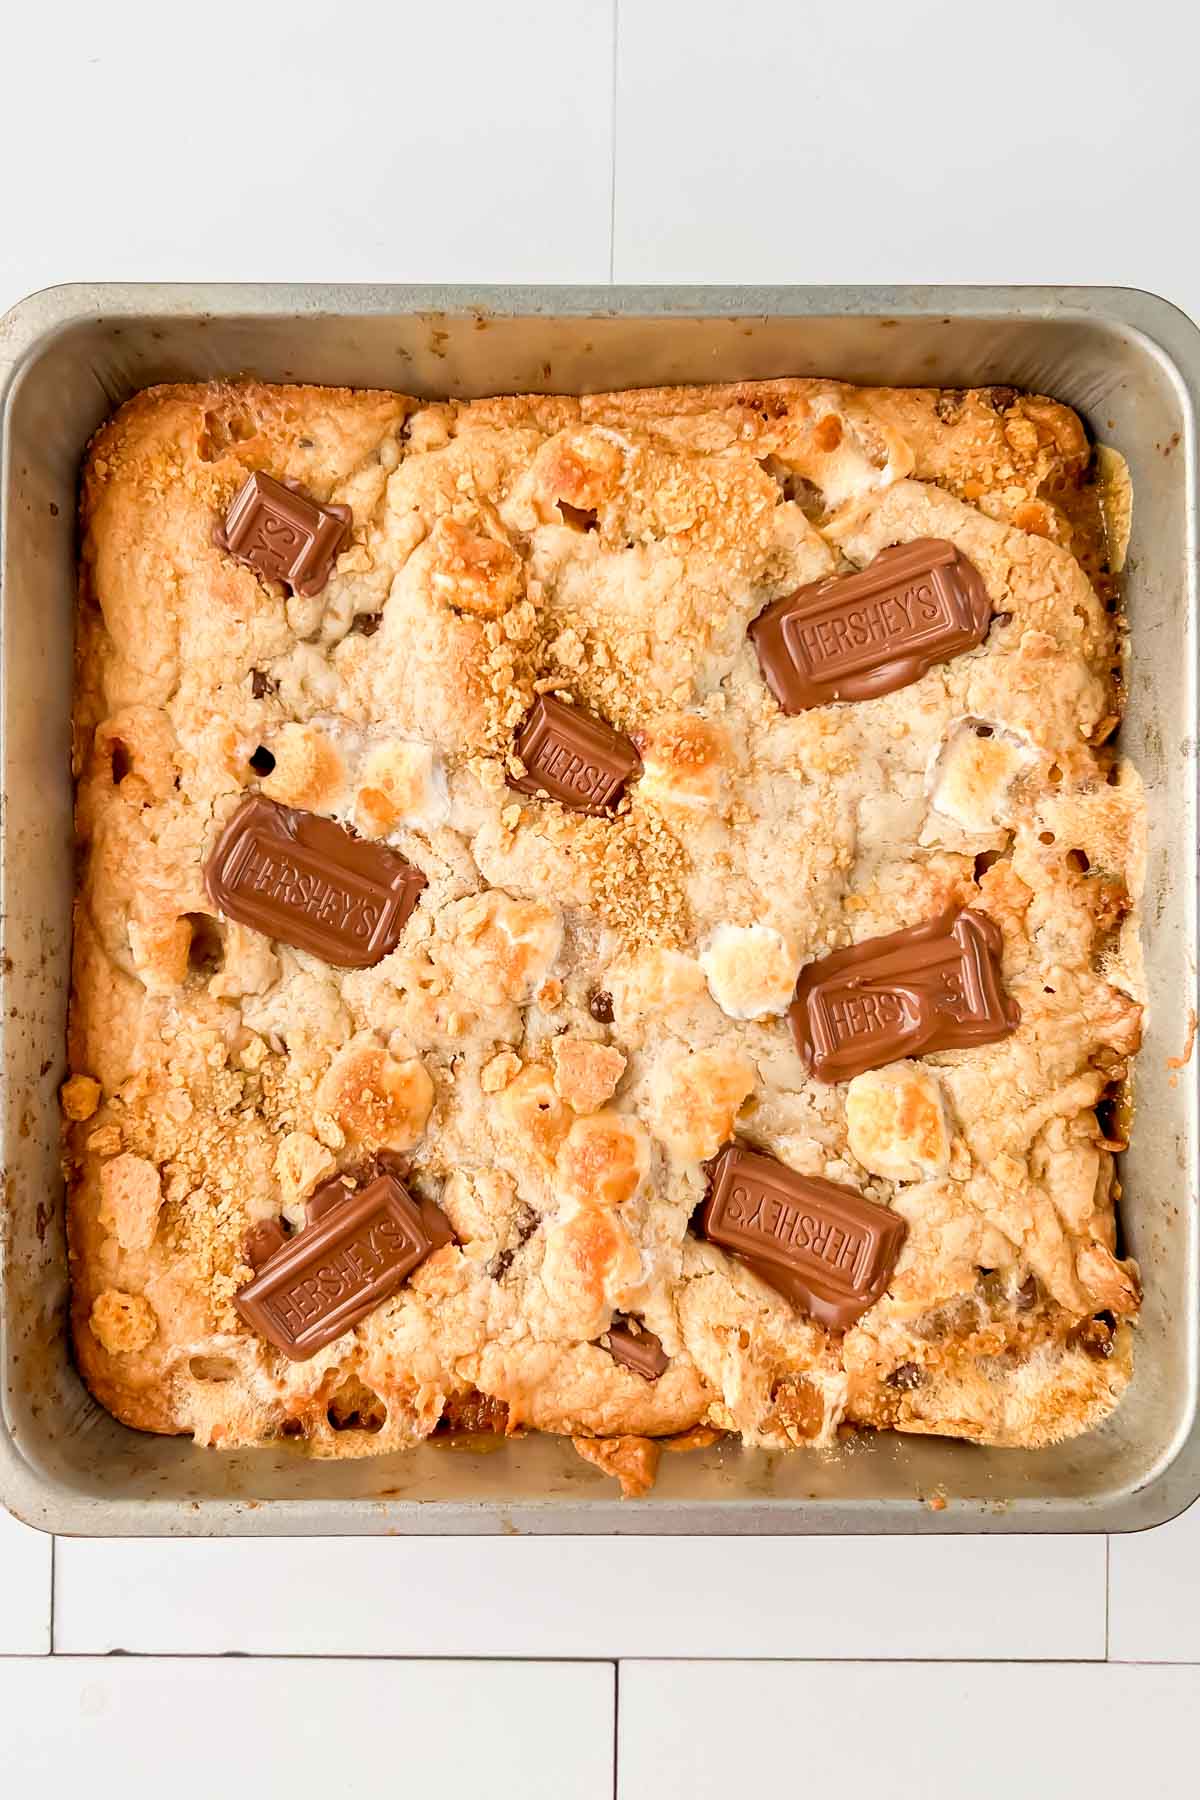 Smores casserole in square pan with hersheys squares on top.